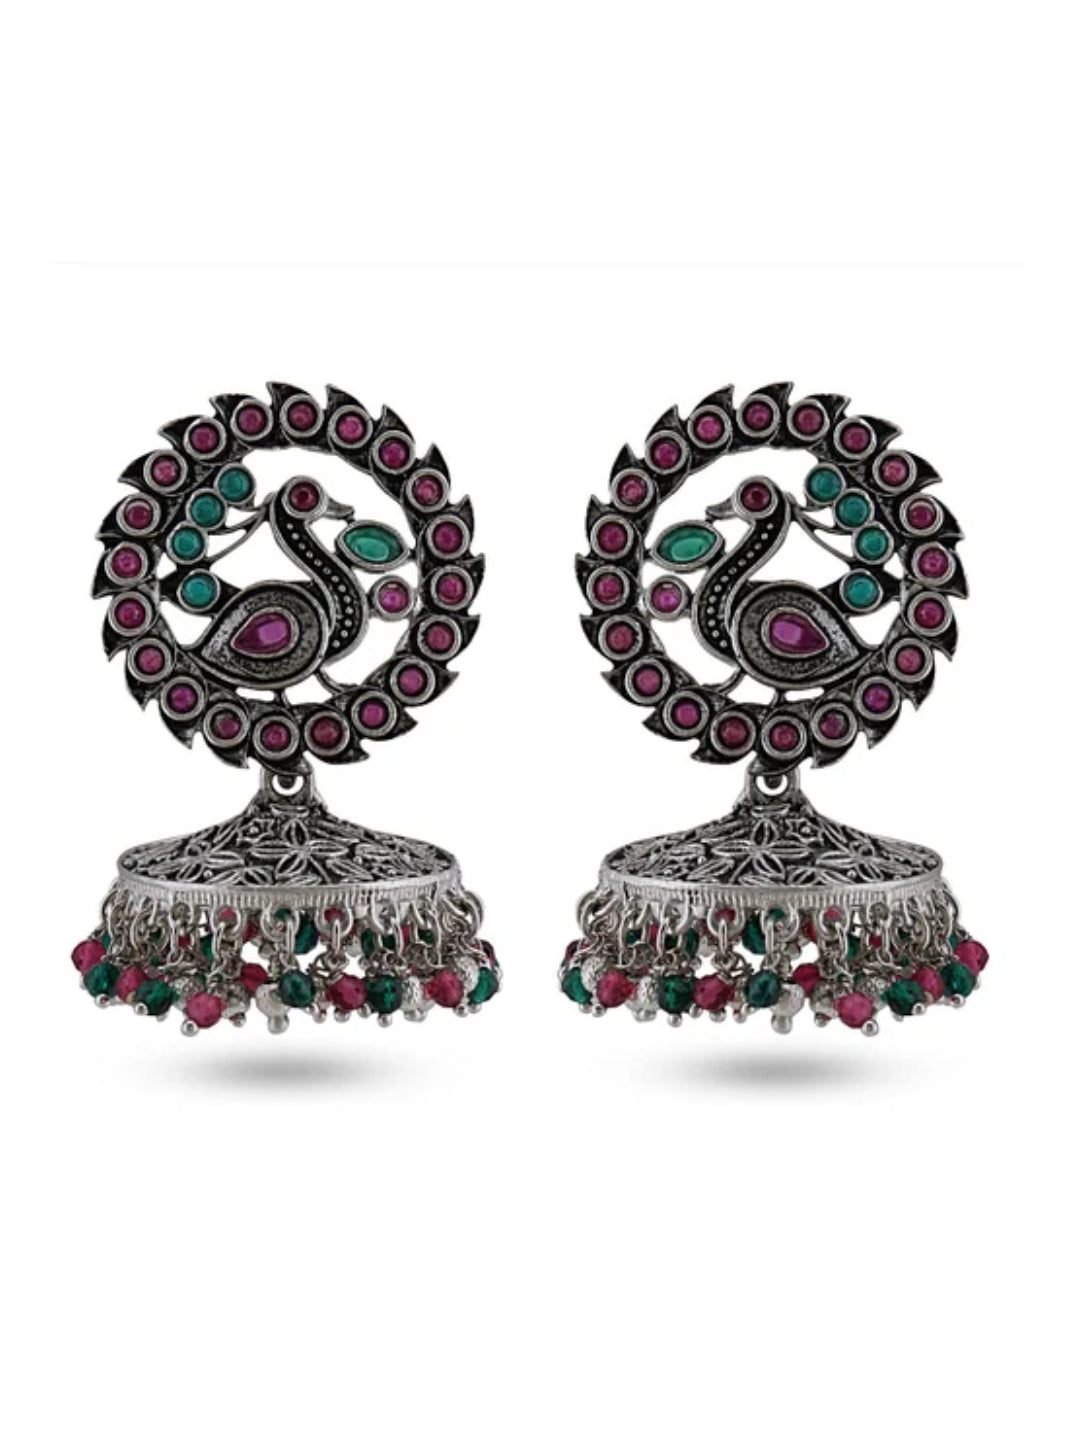 Silver-Plated Peacock Shaped Oxidized Jhumkas Earrings